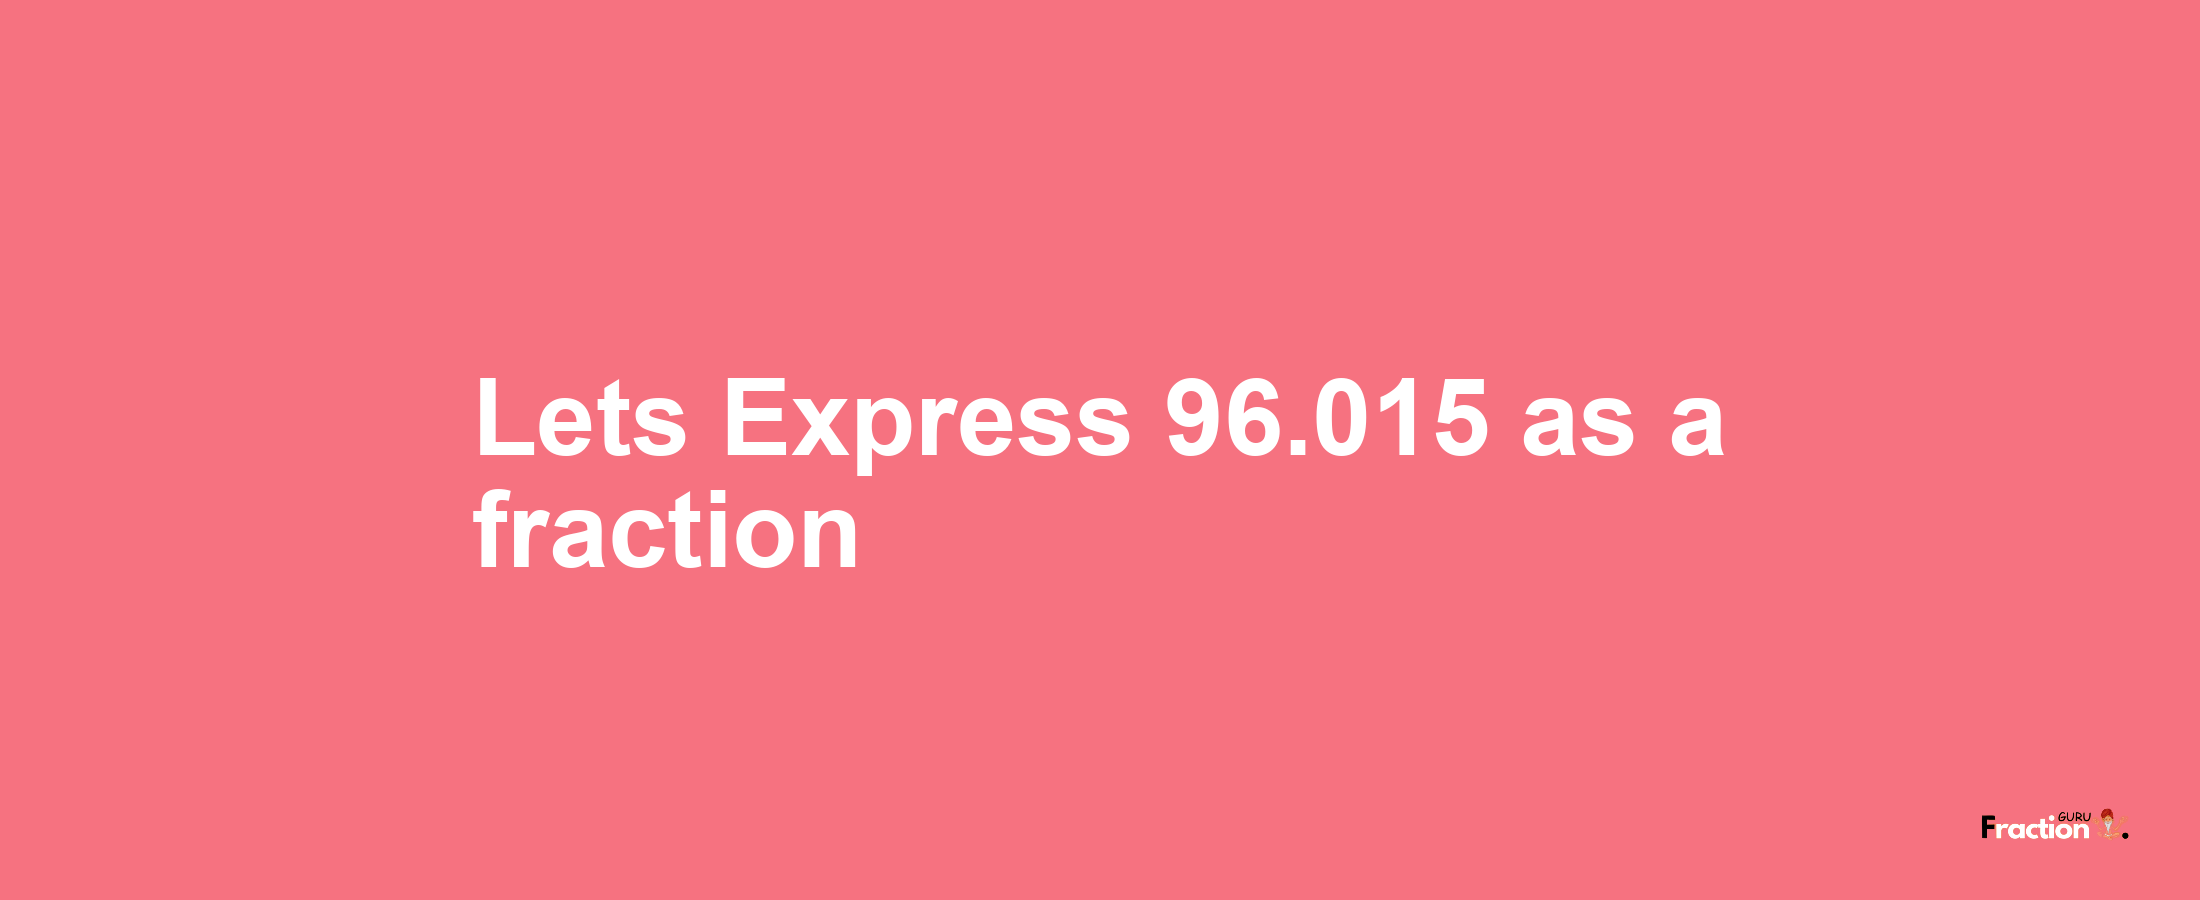 Lets Express 96.015 as afraction